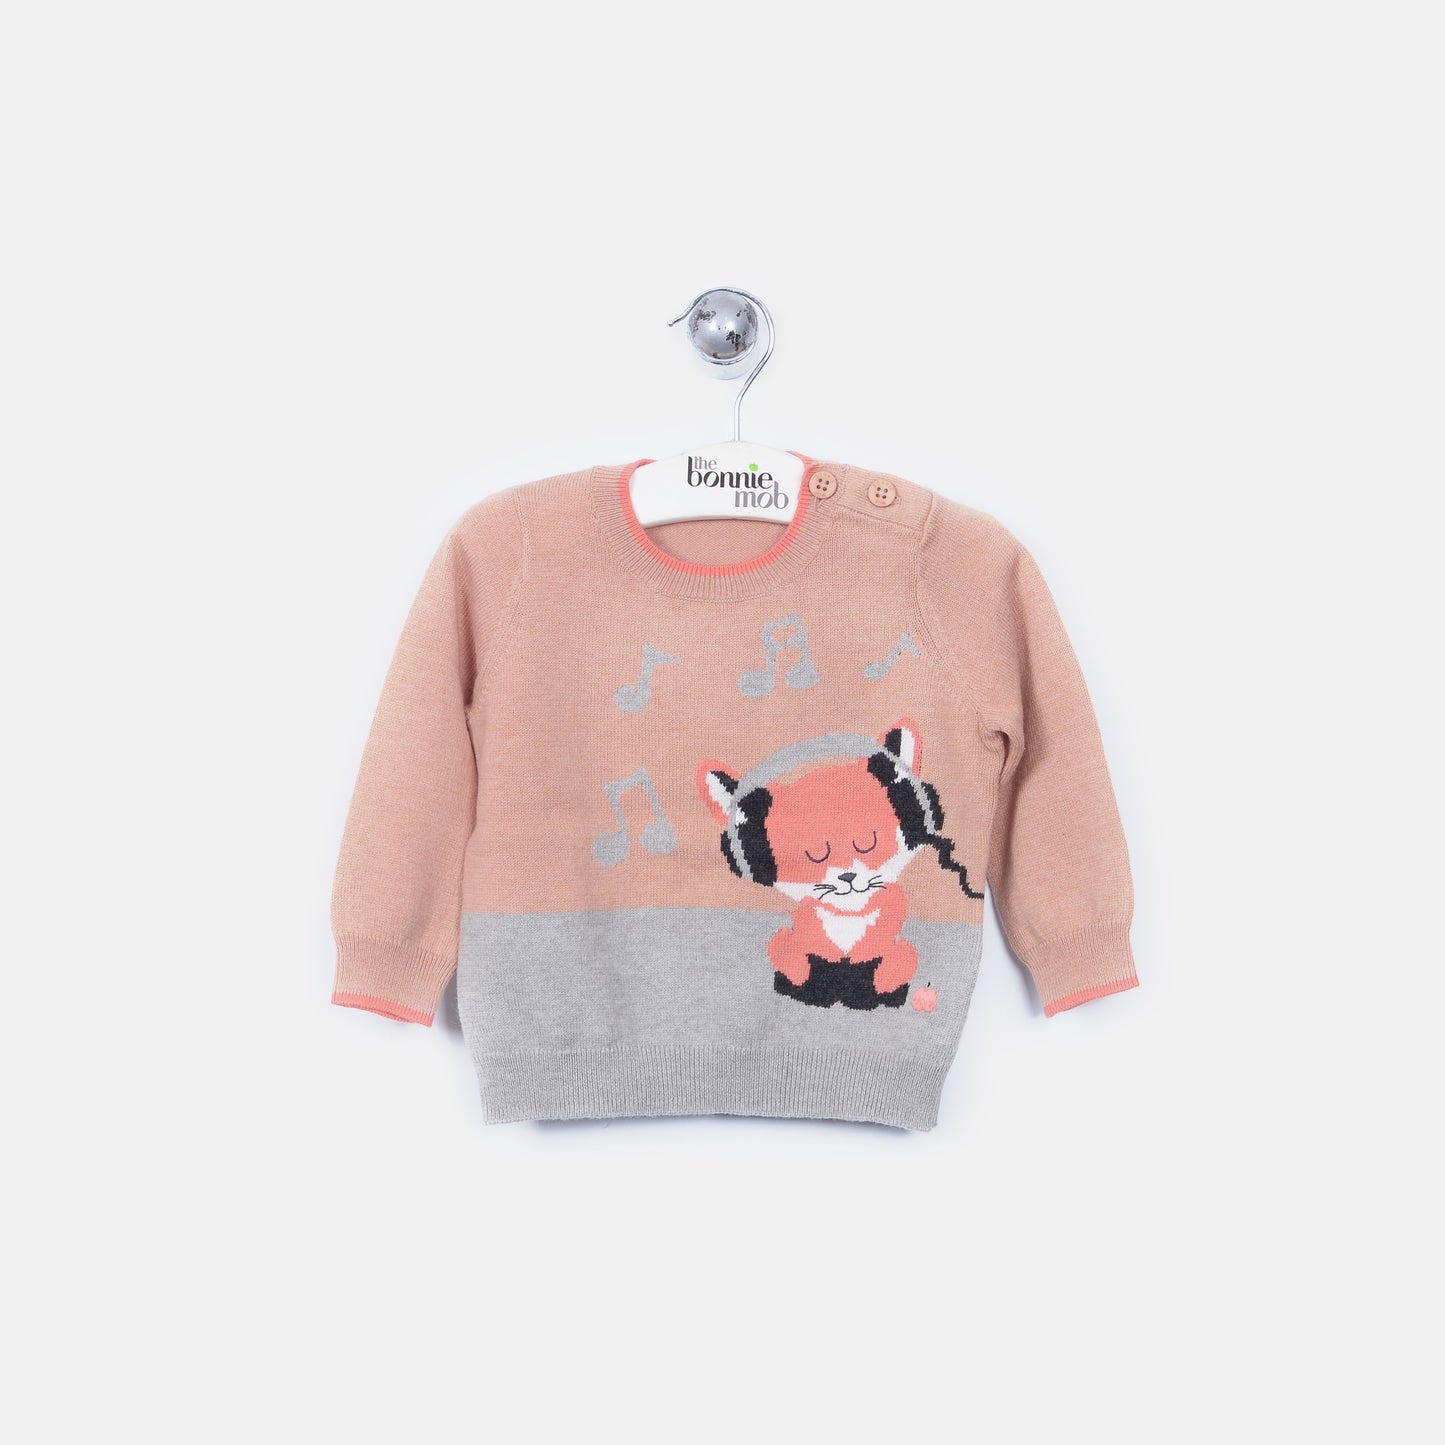 SWEATER - BABY - 2 COLOR (CLOUD JADE/ DUNE PINK) - L-FRANCIS